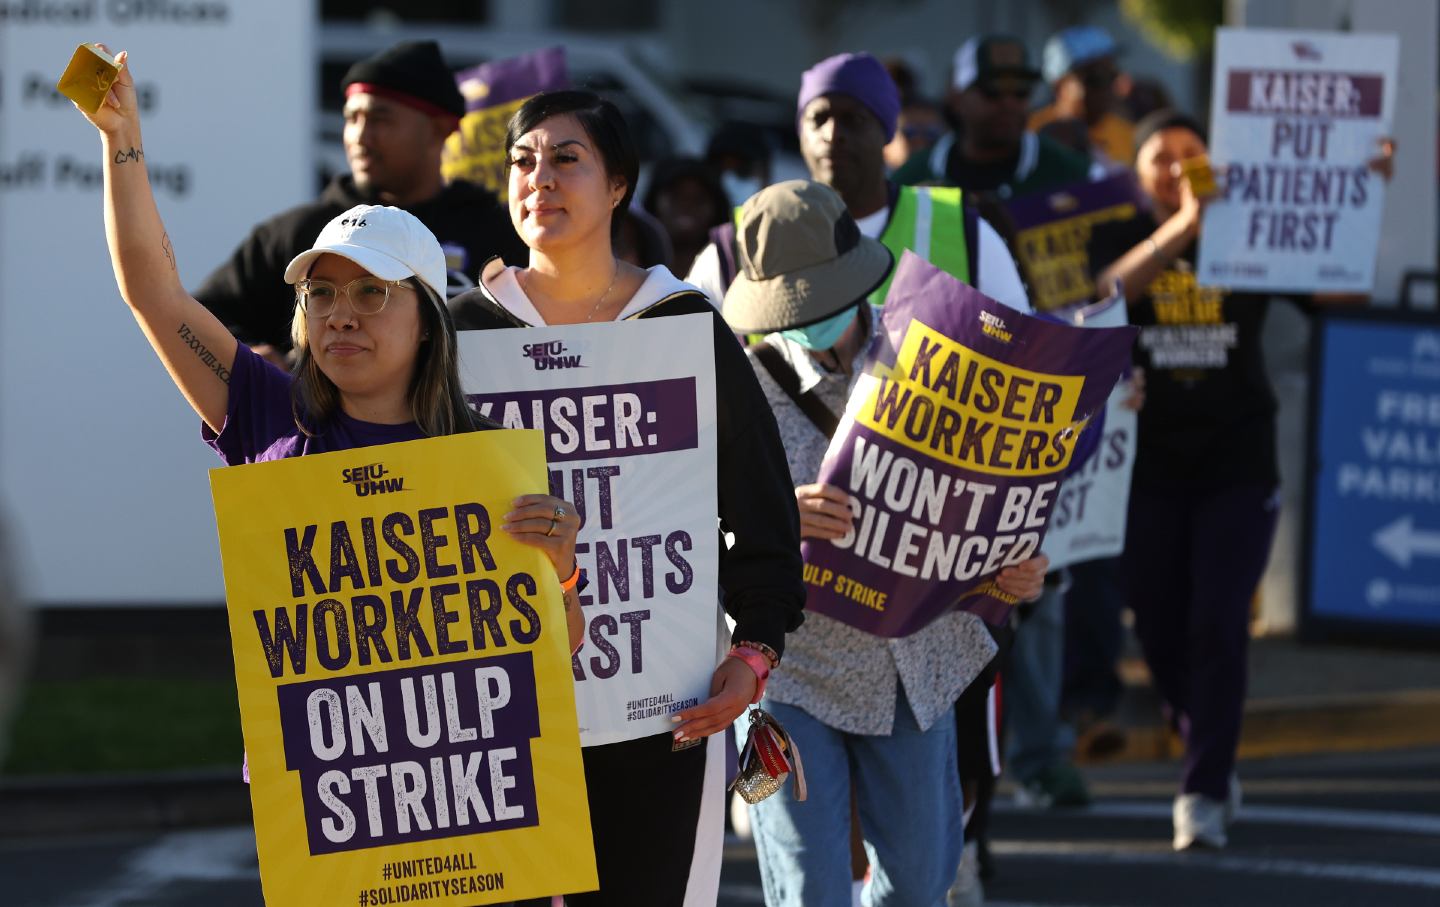 Kaiser Permanente workers on strike marching with signs on a picket line